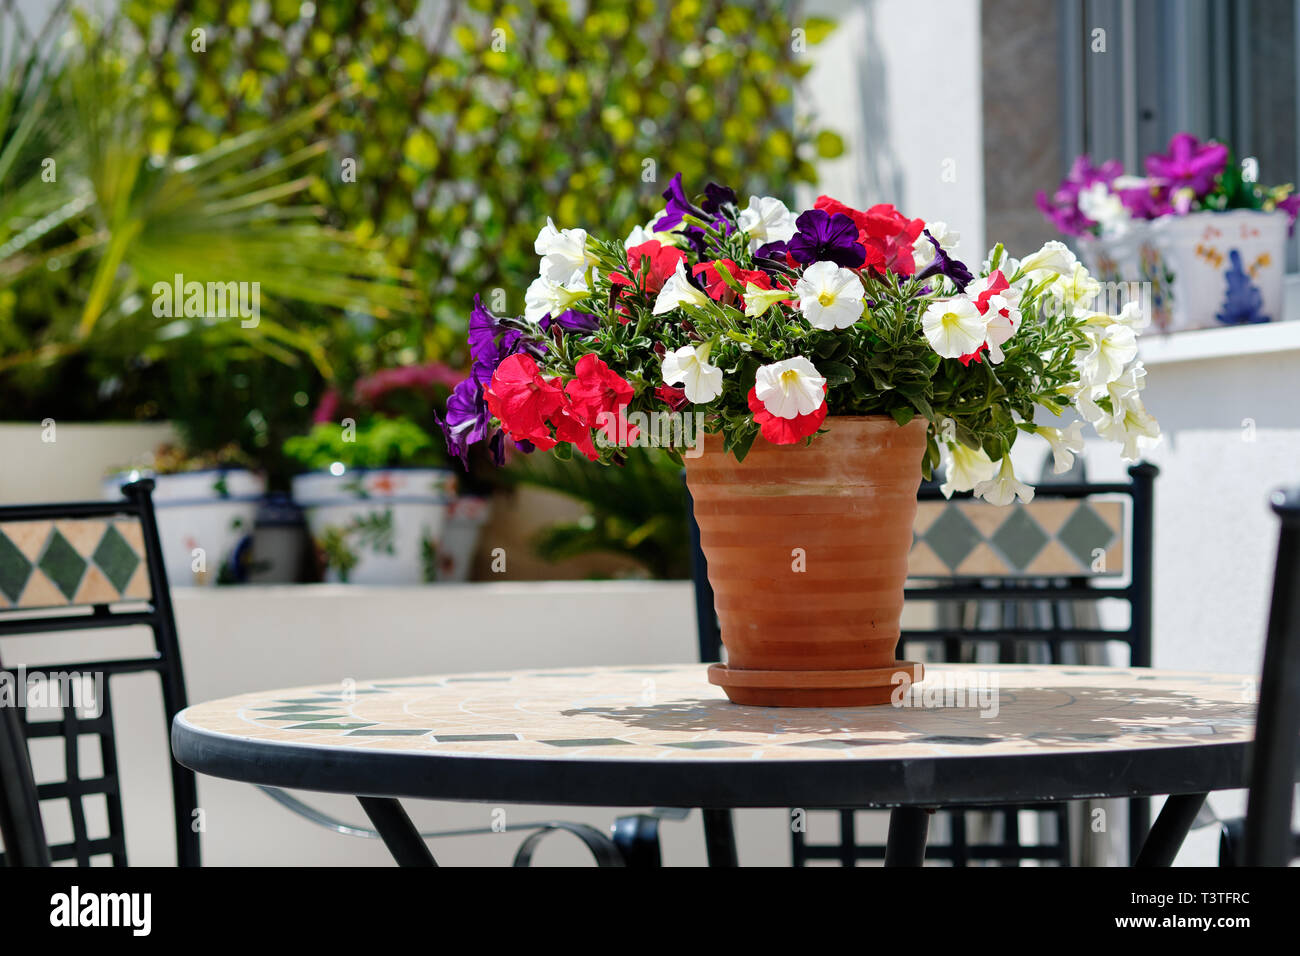 Multi coloured garden flowers in ceramic pot on table outdoors, sunny day no people Stock Photo